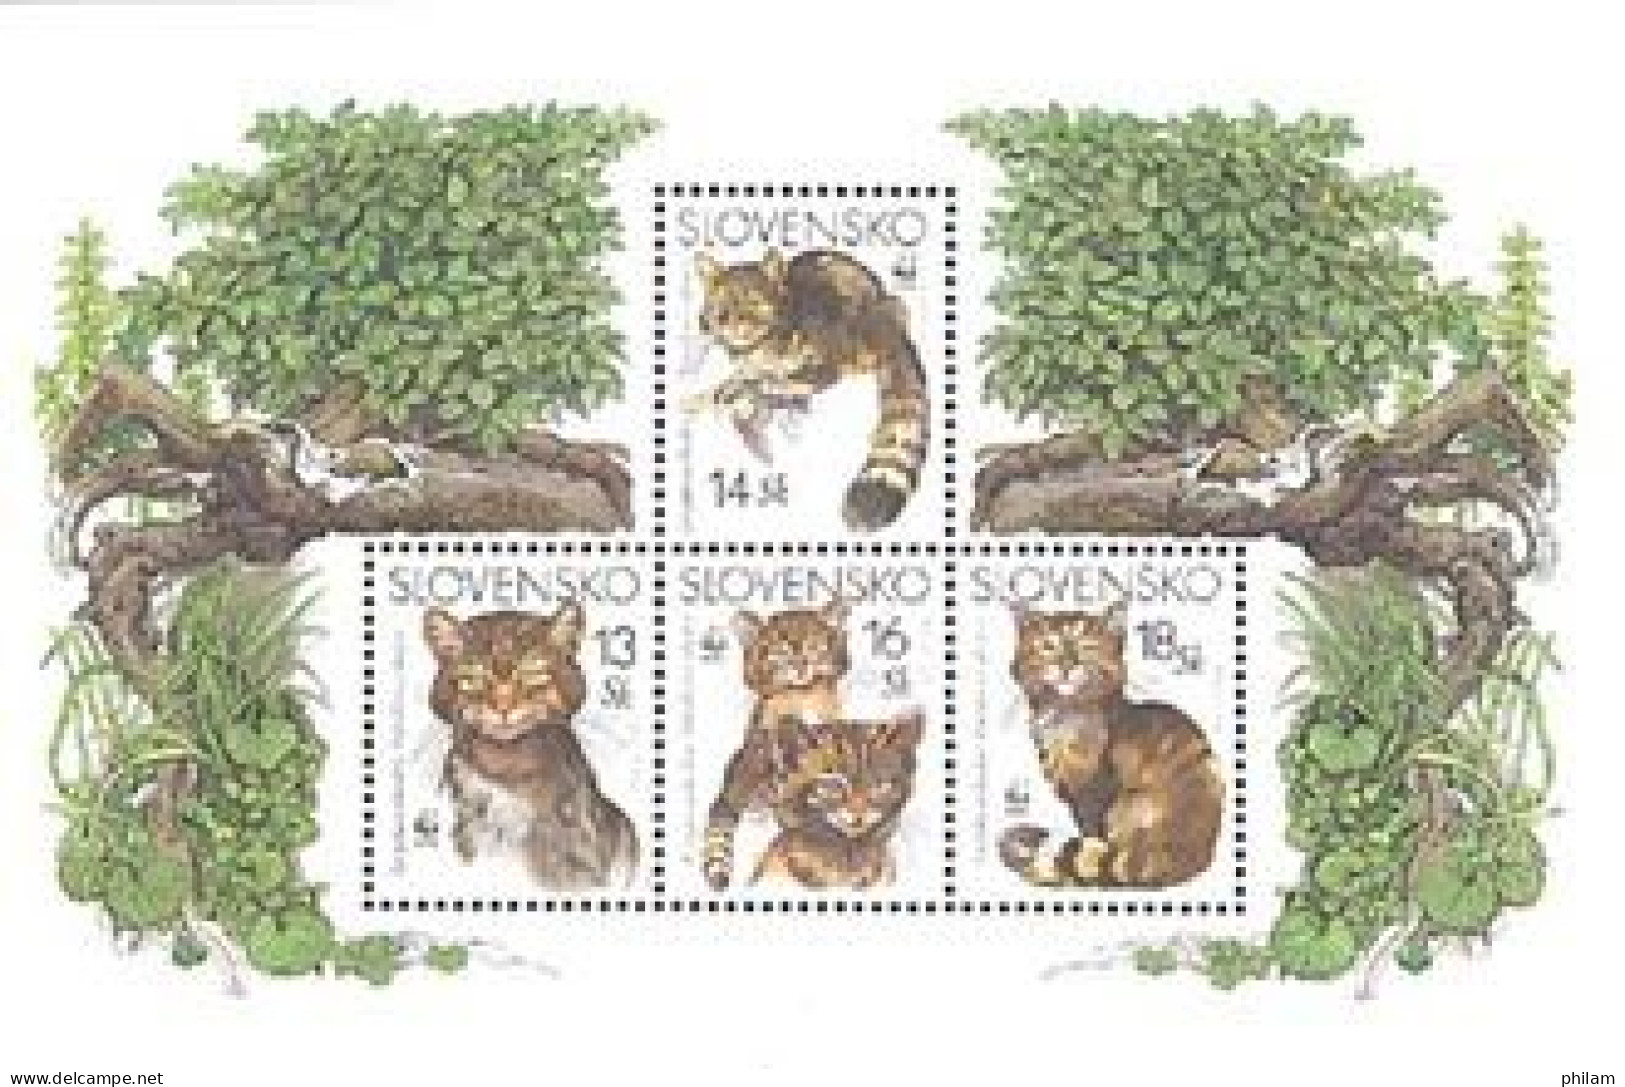 SLOVAQUIE 2003 - W.W.F. - Chats Domestiques 4 V. - Unused Stamps